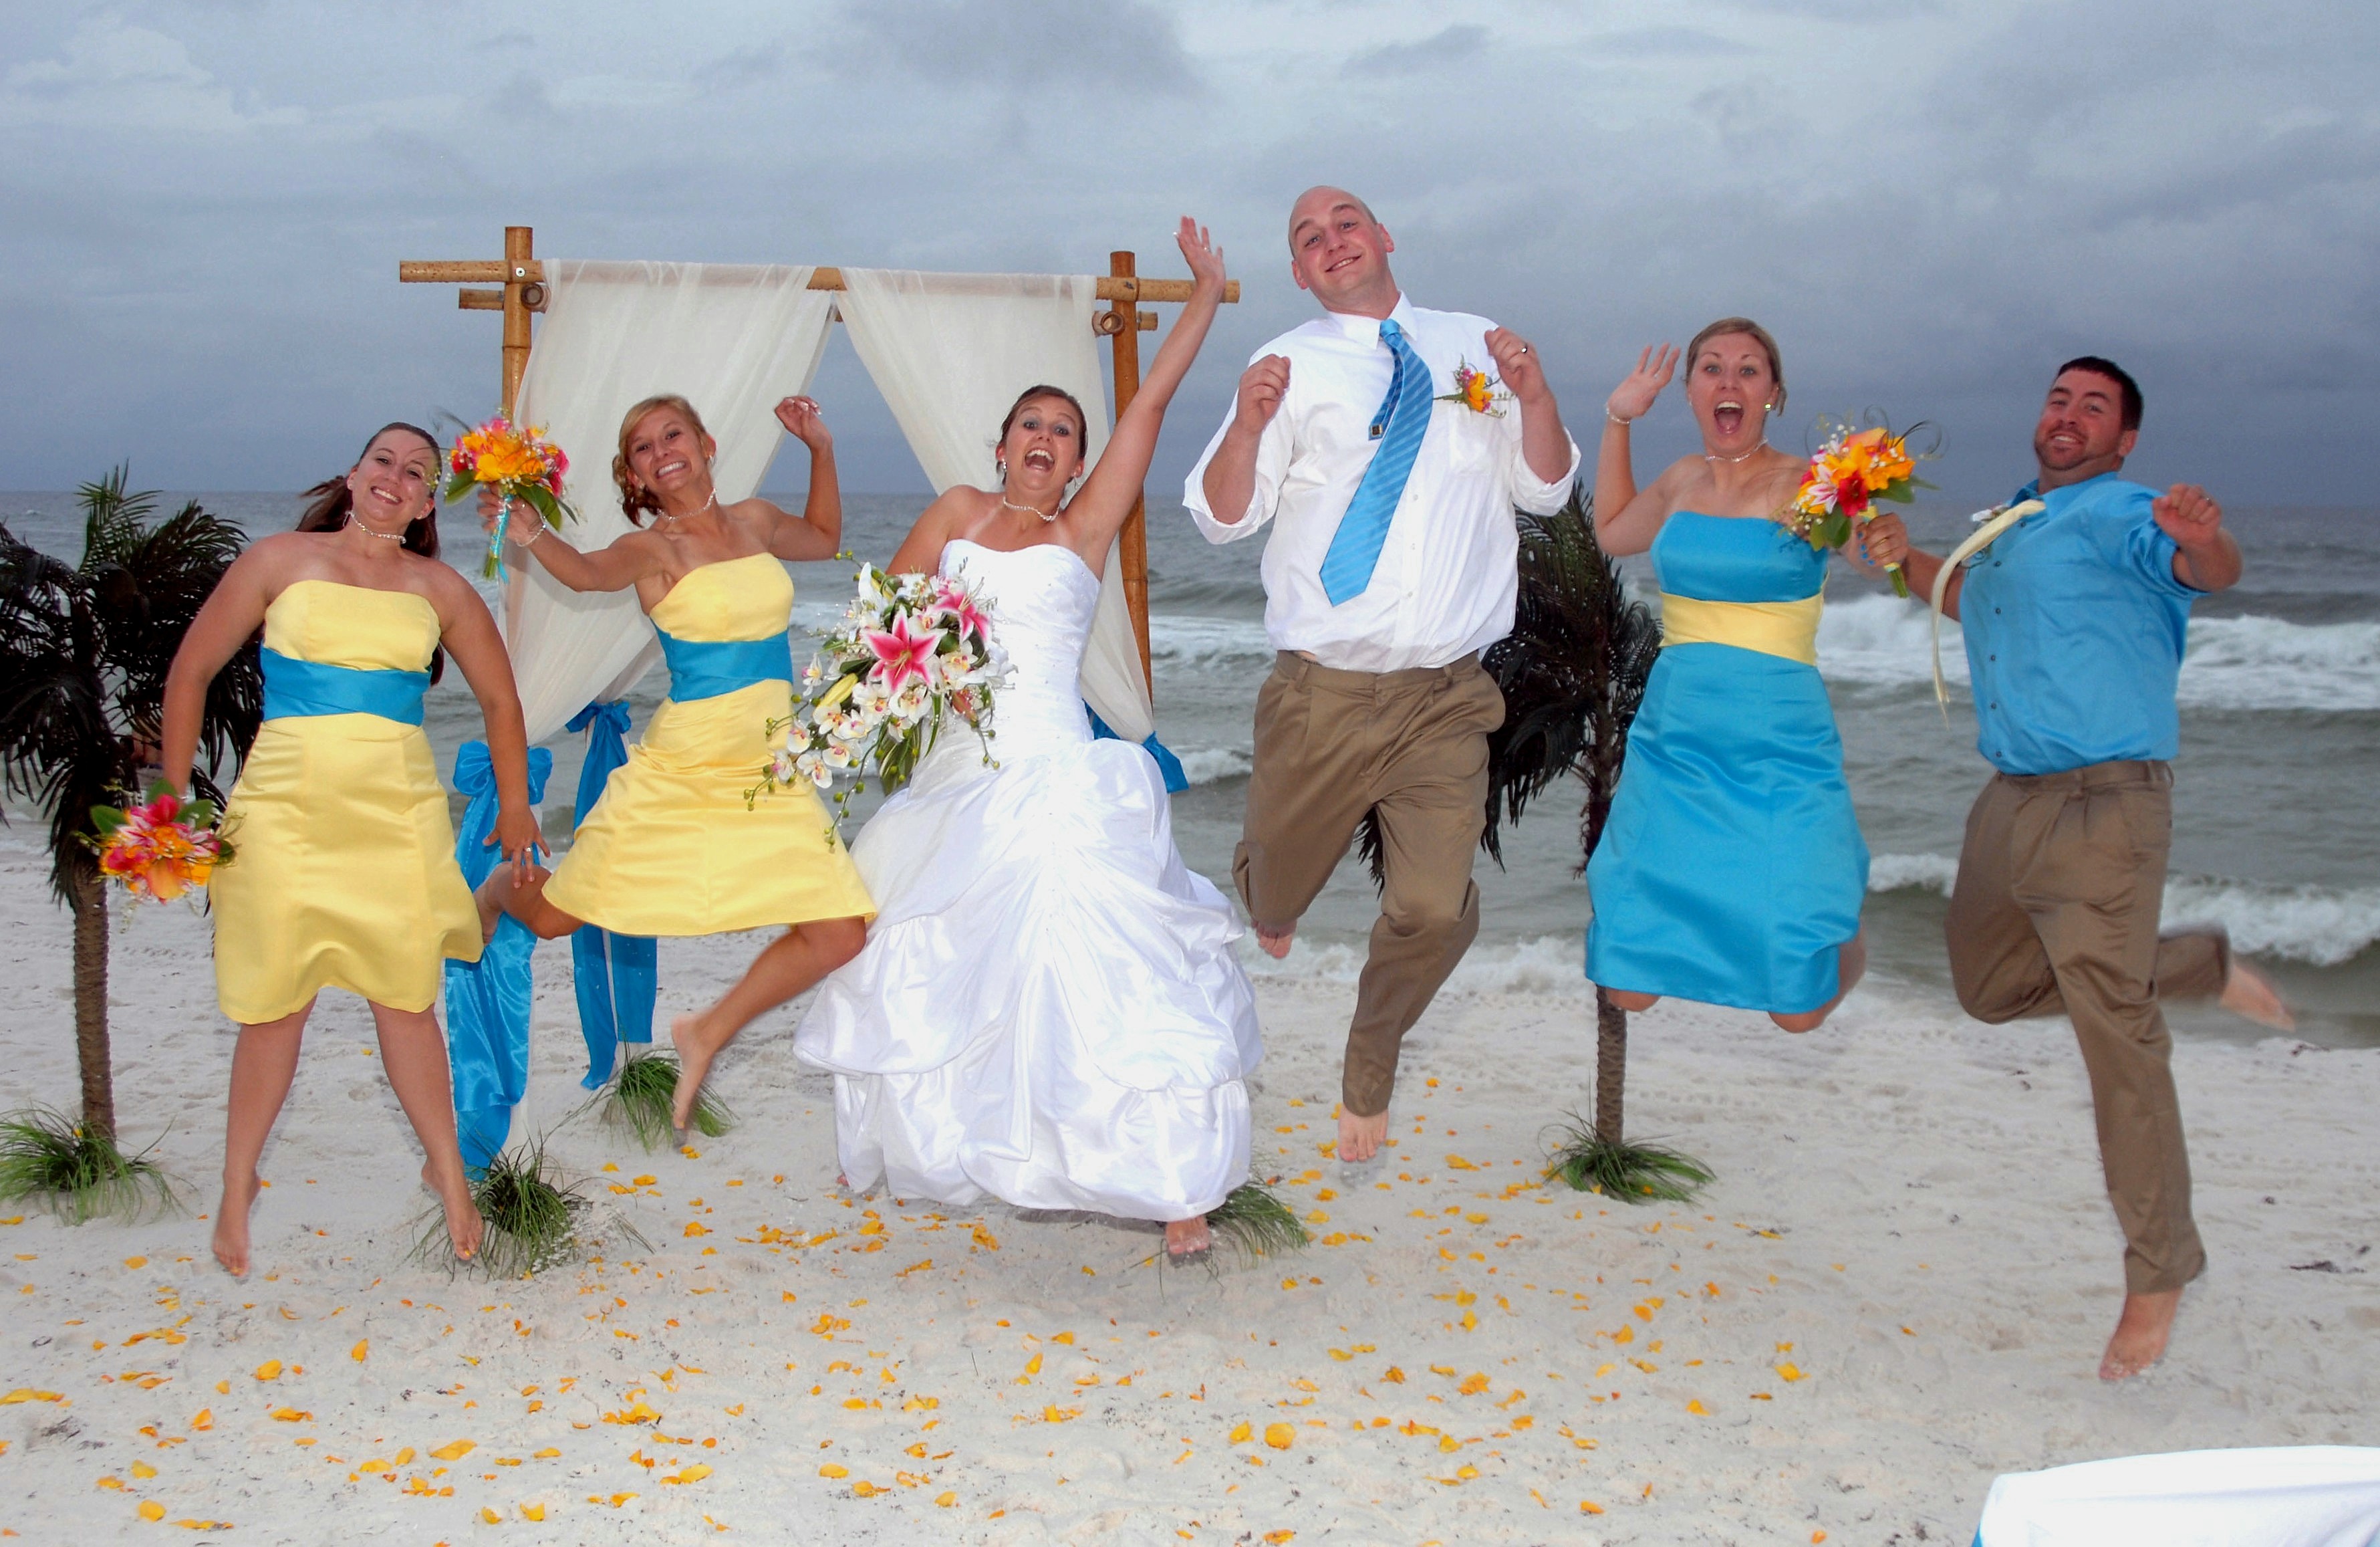 Congratulations on YOUR upcoming Barefoot beach wedding